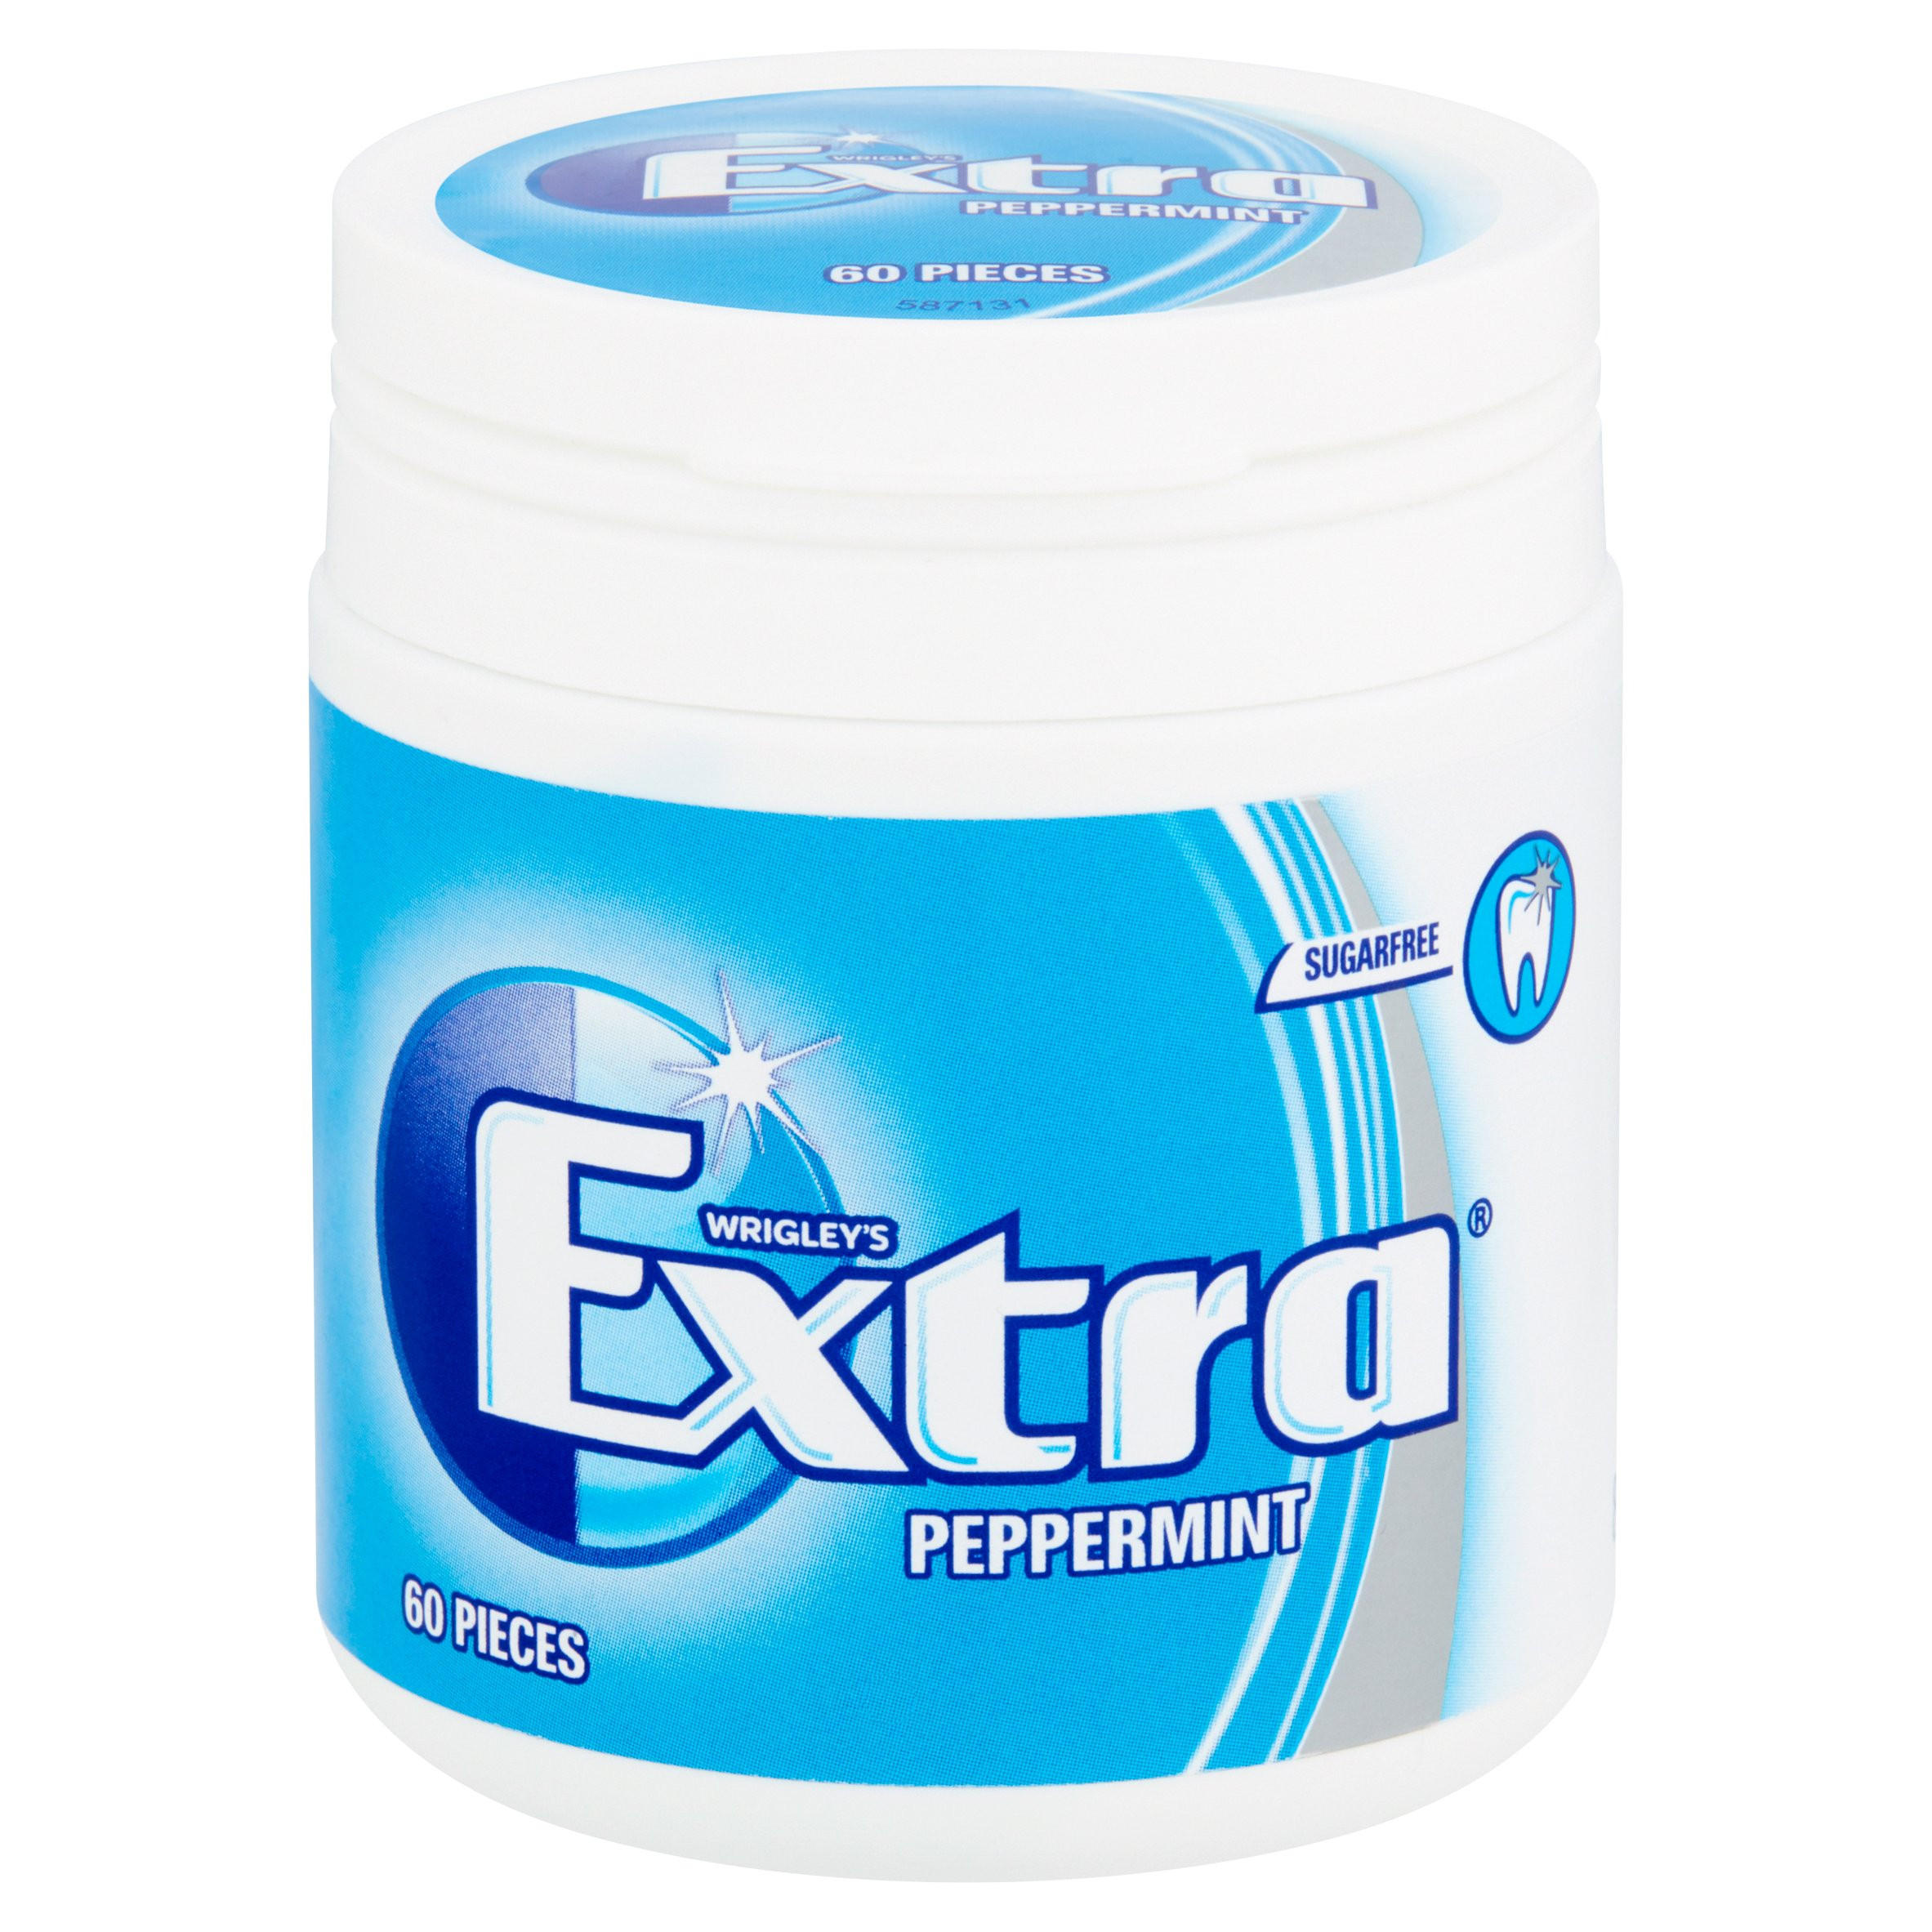 extra-peppermint-chewing-gum-sugar-free-bottle-60-pieces-chewing-gum